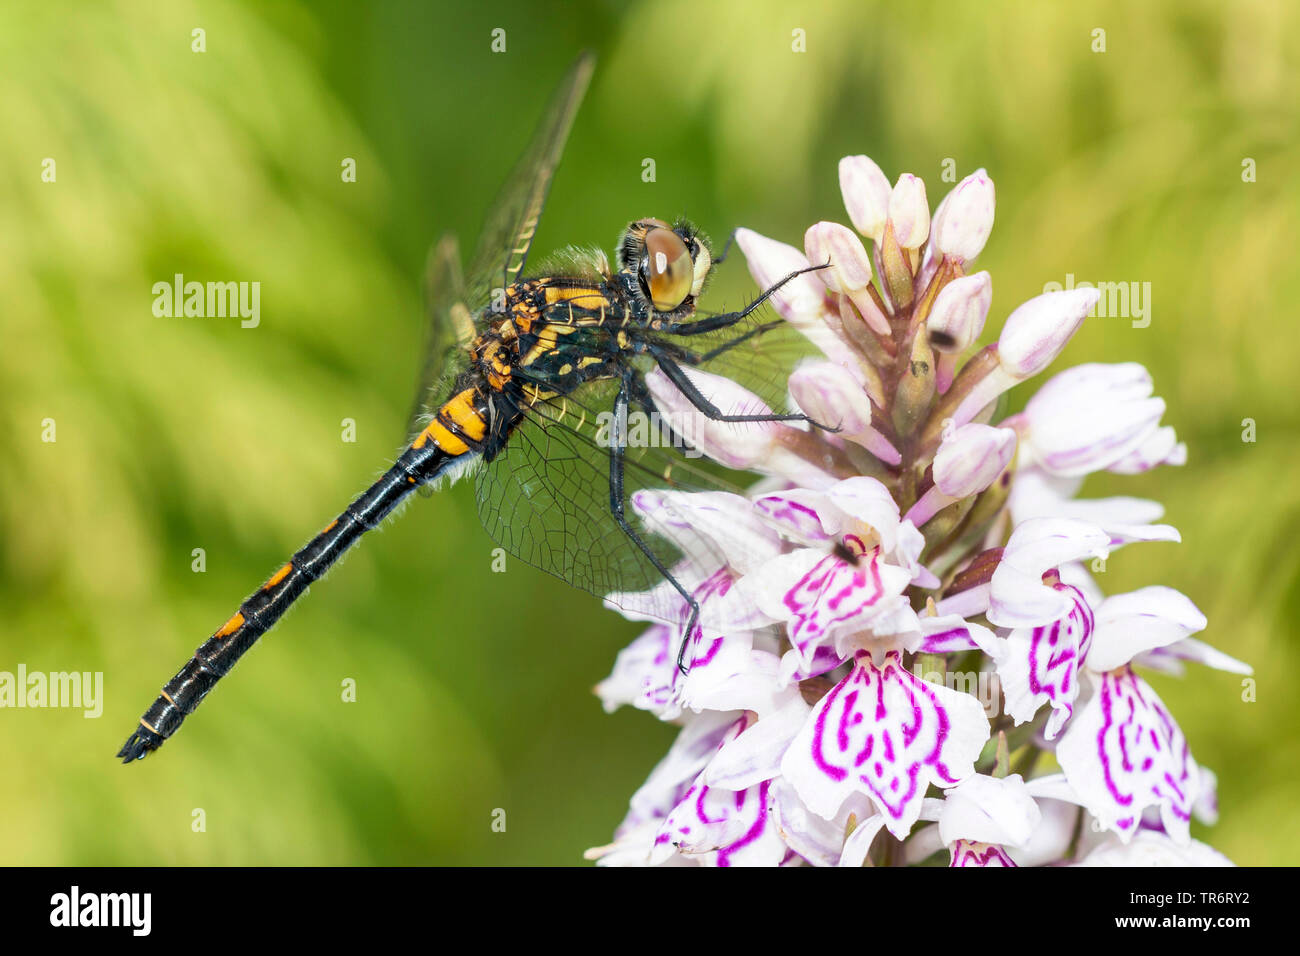 Large white-faced darter, Yellow-spotted whiteface (Leucorrhinia pectoralis, Leucorhinia pectoralis), on orchid blossom, Norway, Oppland Stock Photo